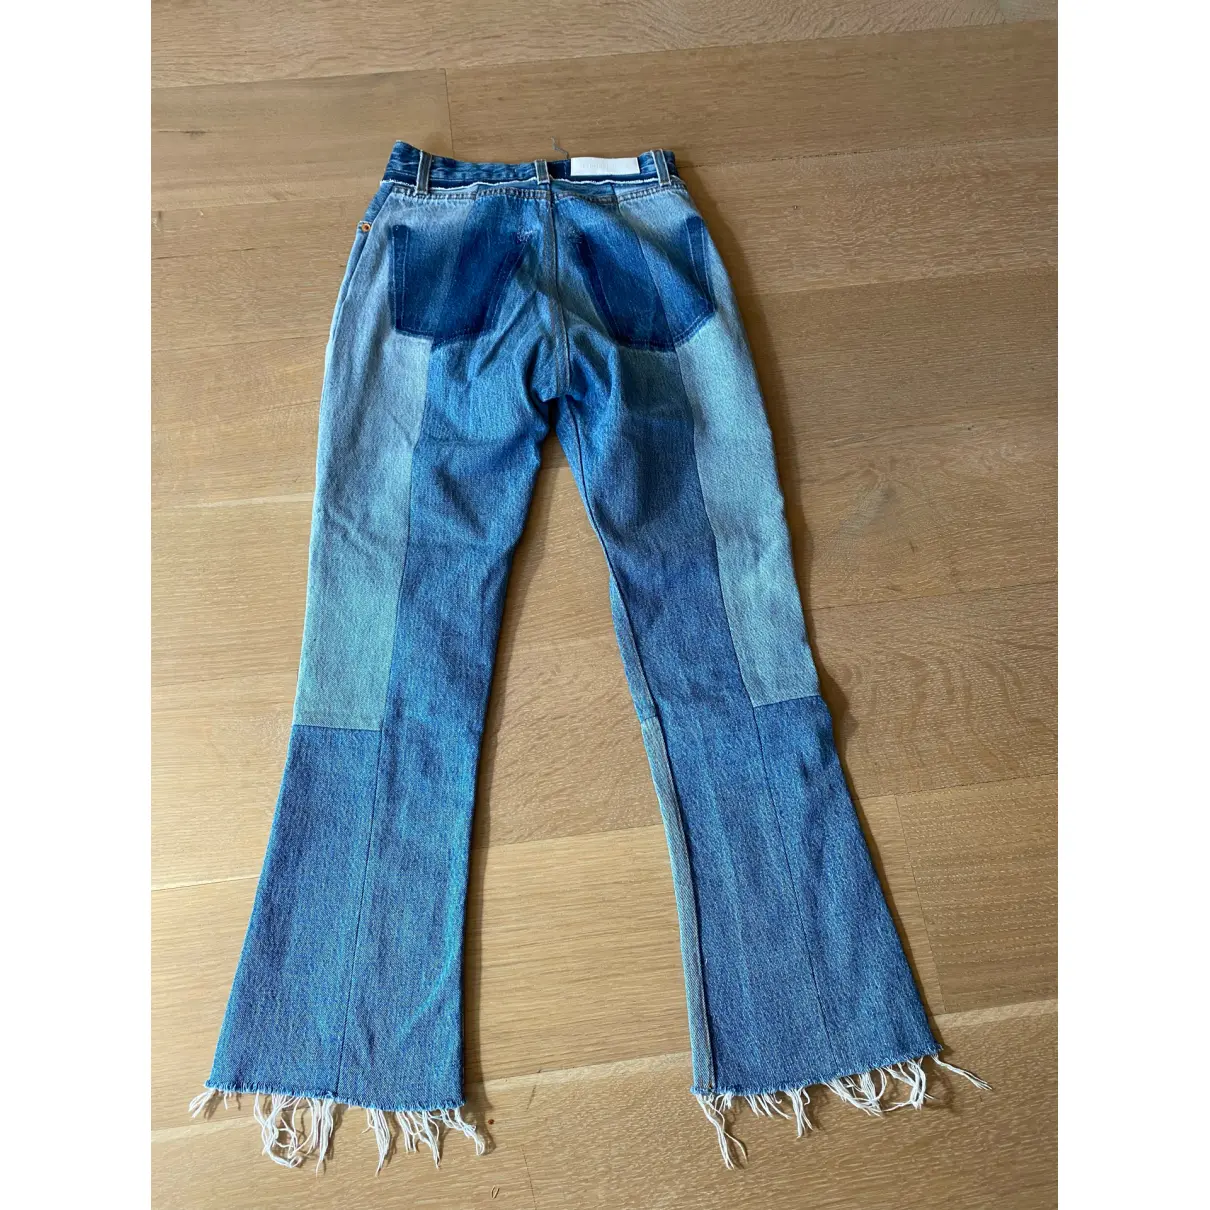 Buy Re/Done x Levi's Jeans online